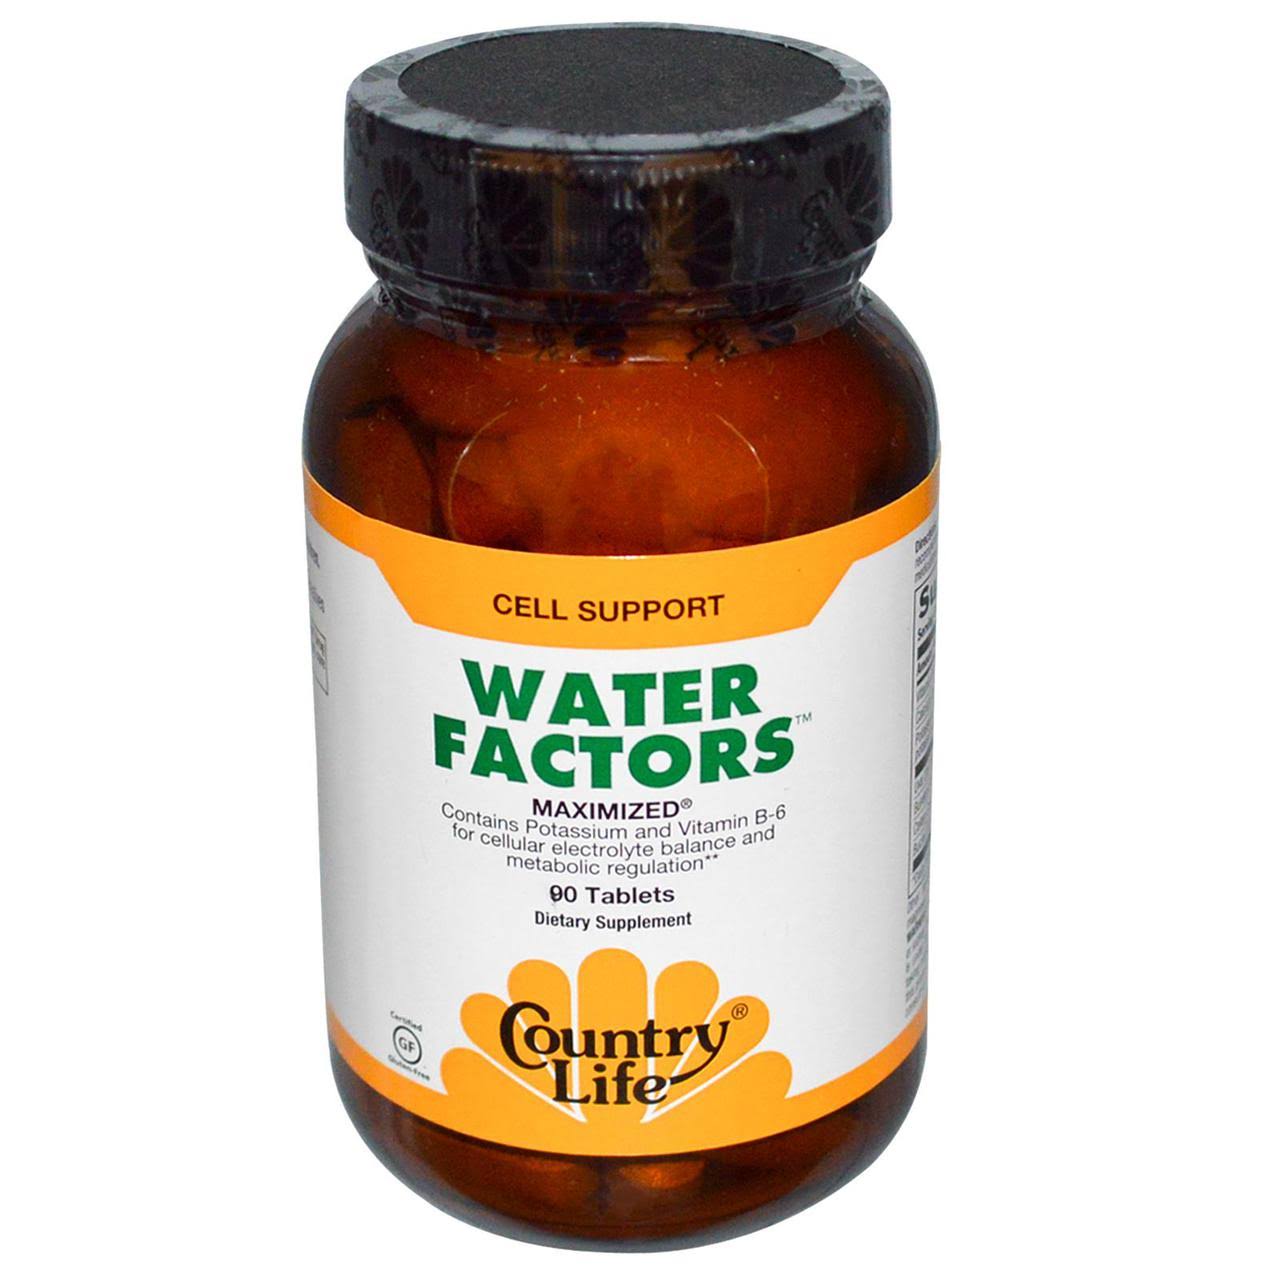 Country Life Water Factors Cell Support - 90 Tablets